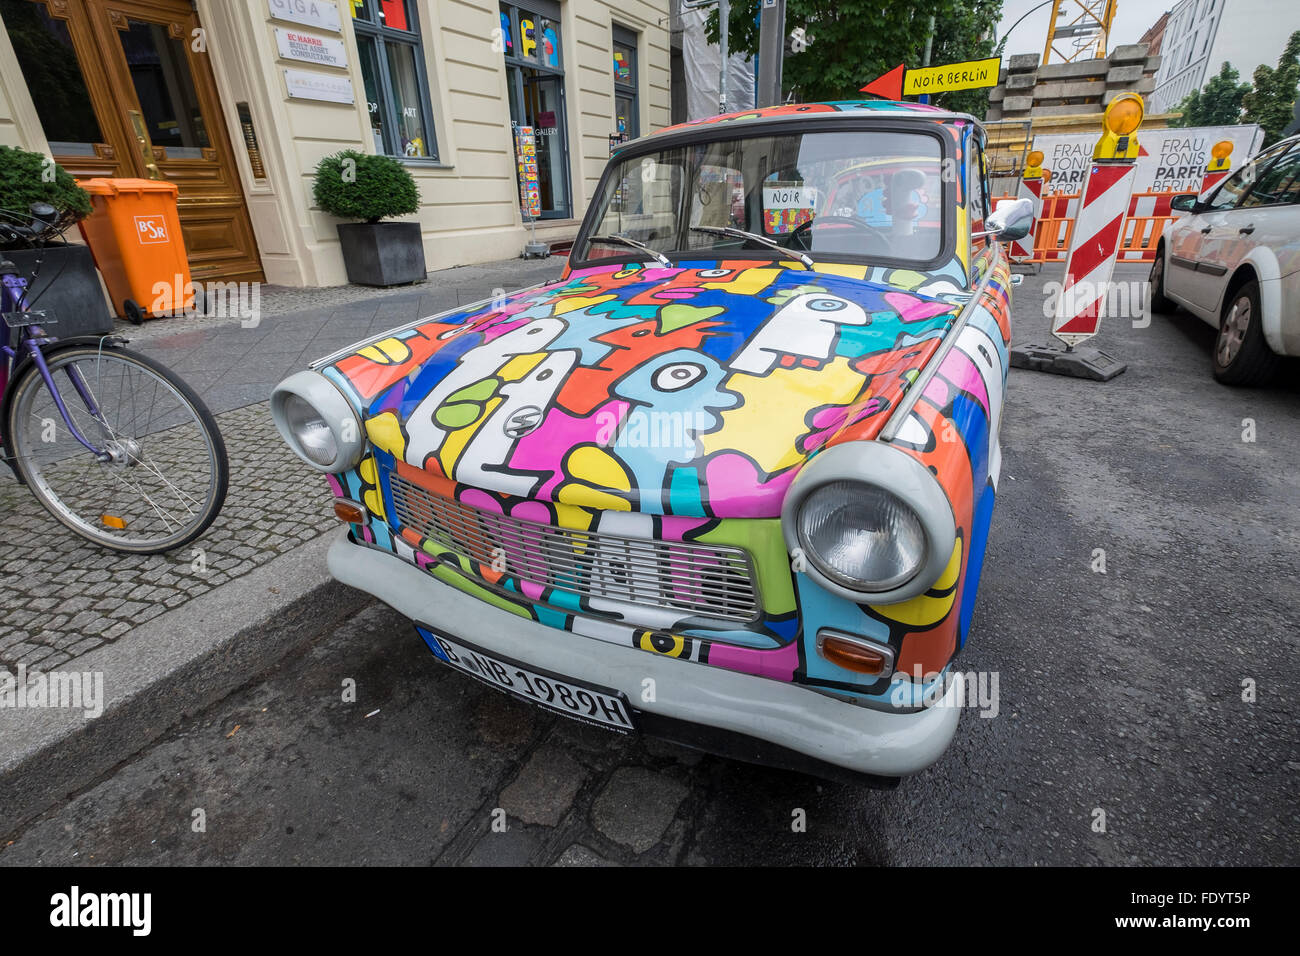 Trabant Motor Car High Resolution Stock Photography and Images - Alamy